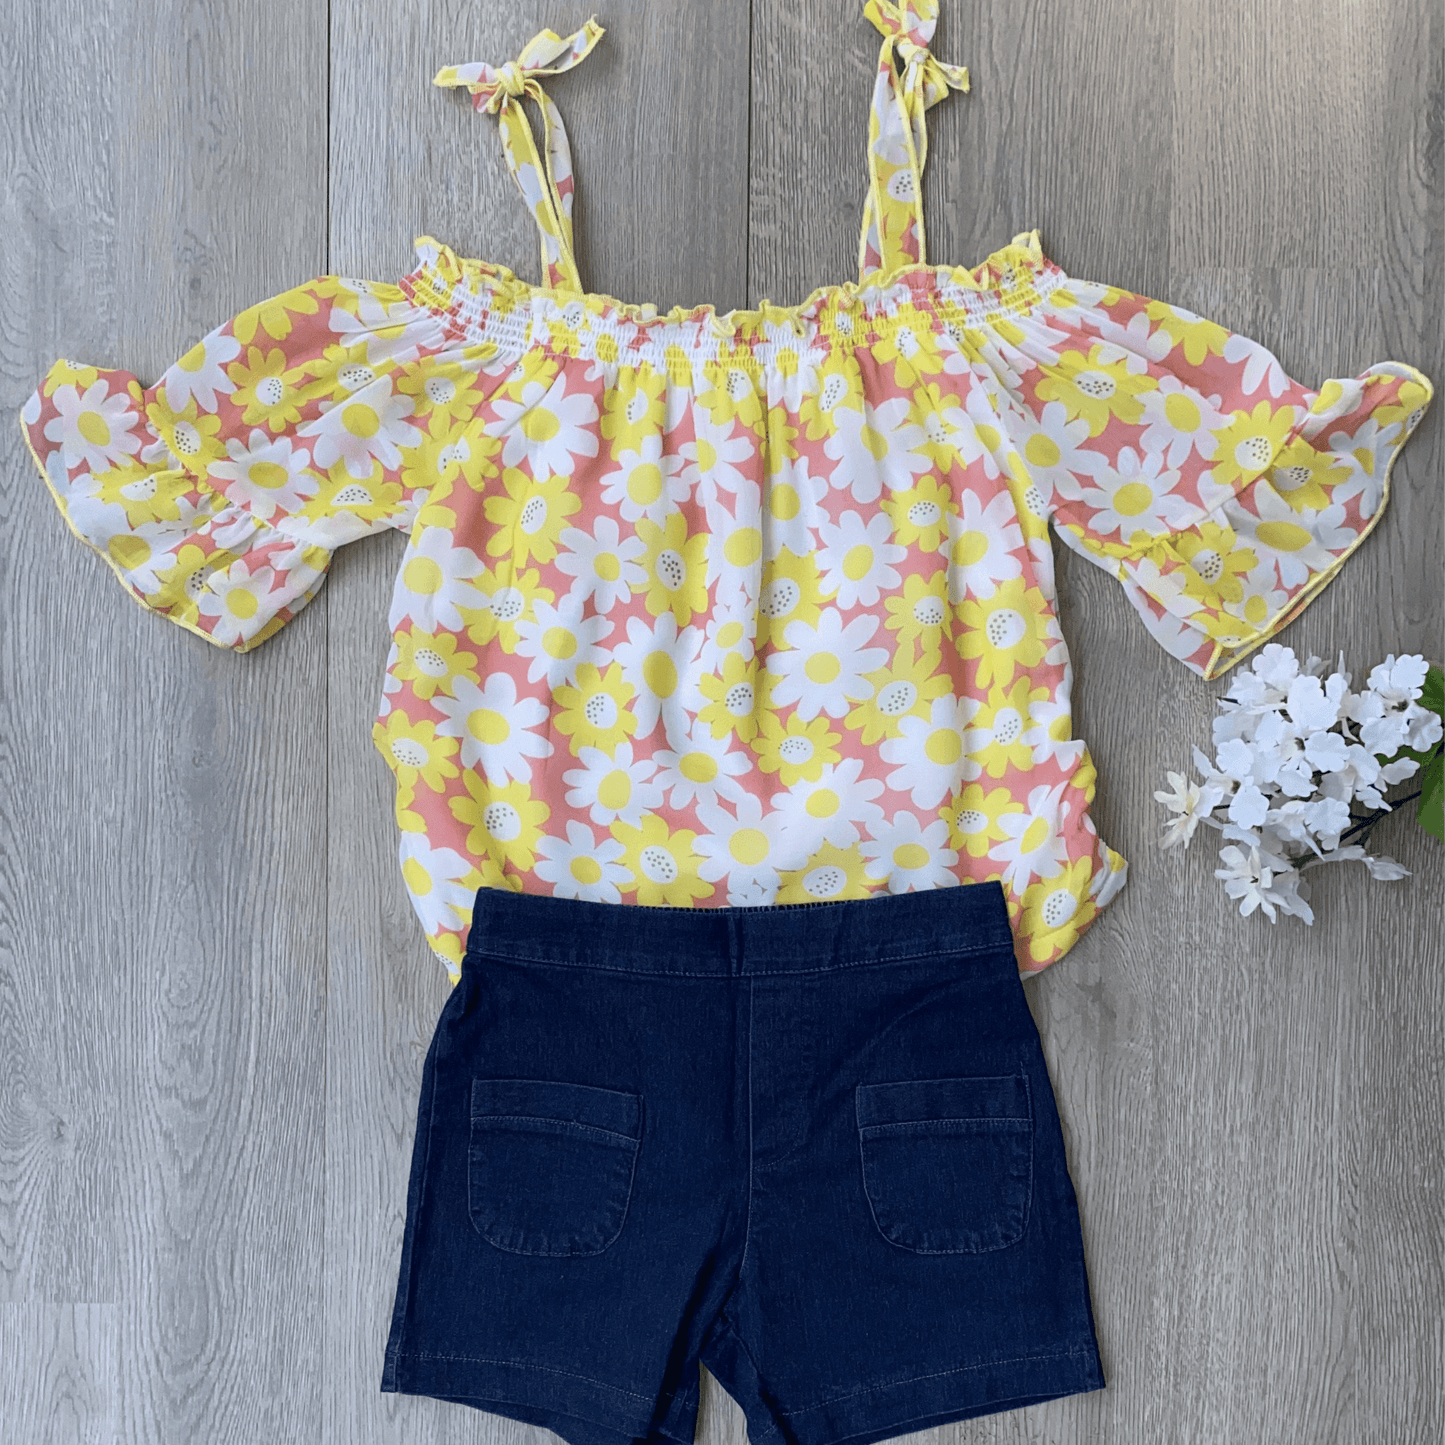 Be summer ready with this cute 2 piece short set featuring an off the shoulder, light weight blouse.  This coral flowered short set is the perfect for a stylish and comfortable look while playing outside in the summer heat.  